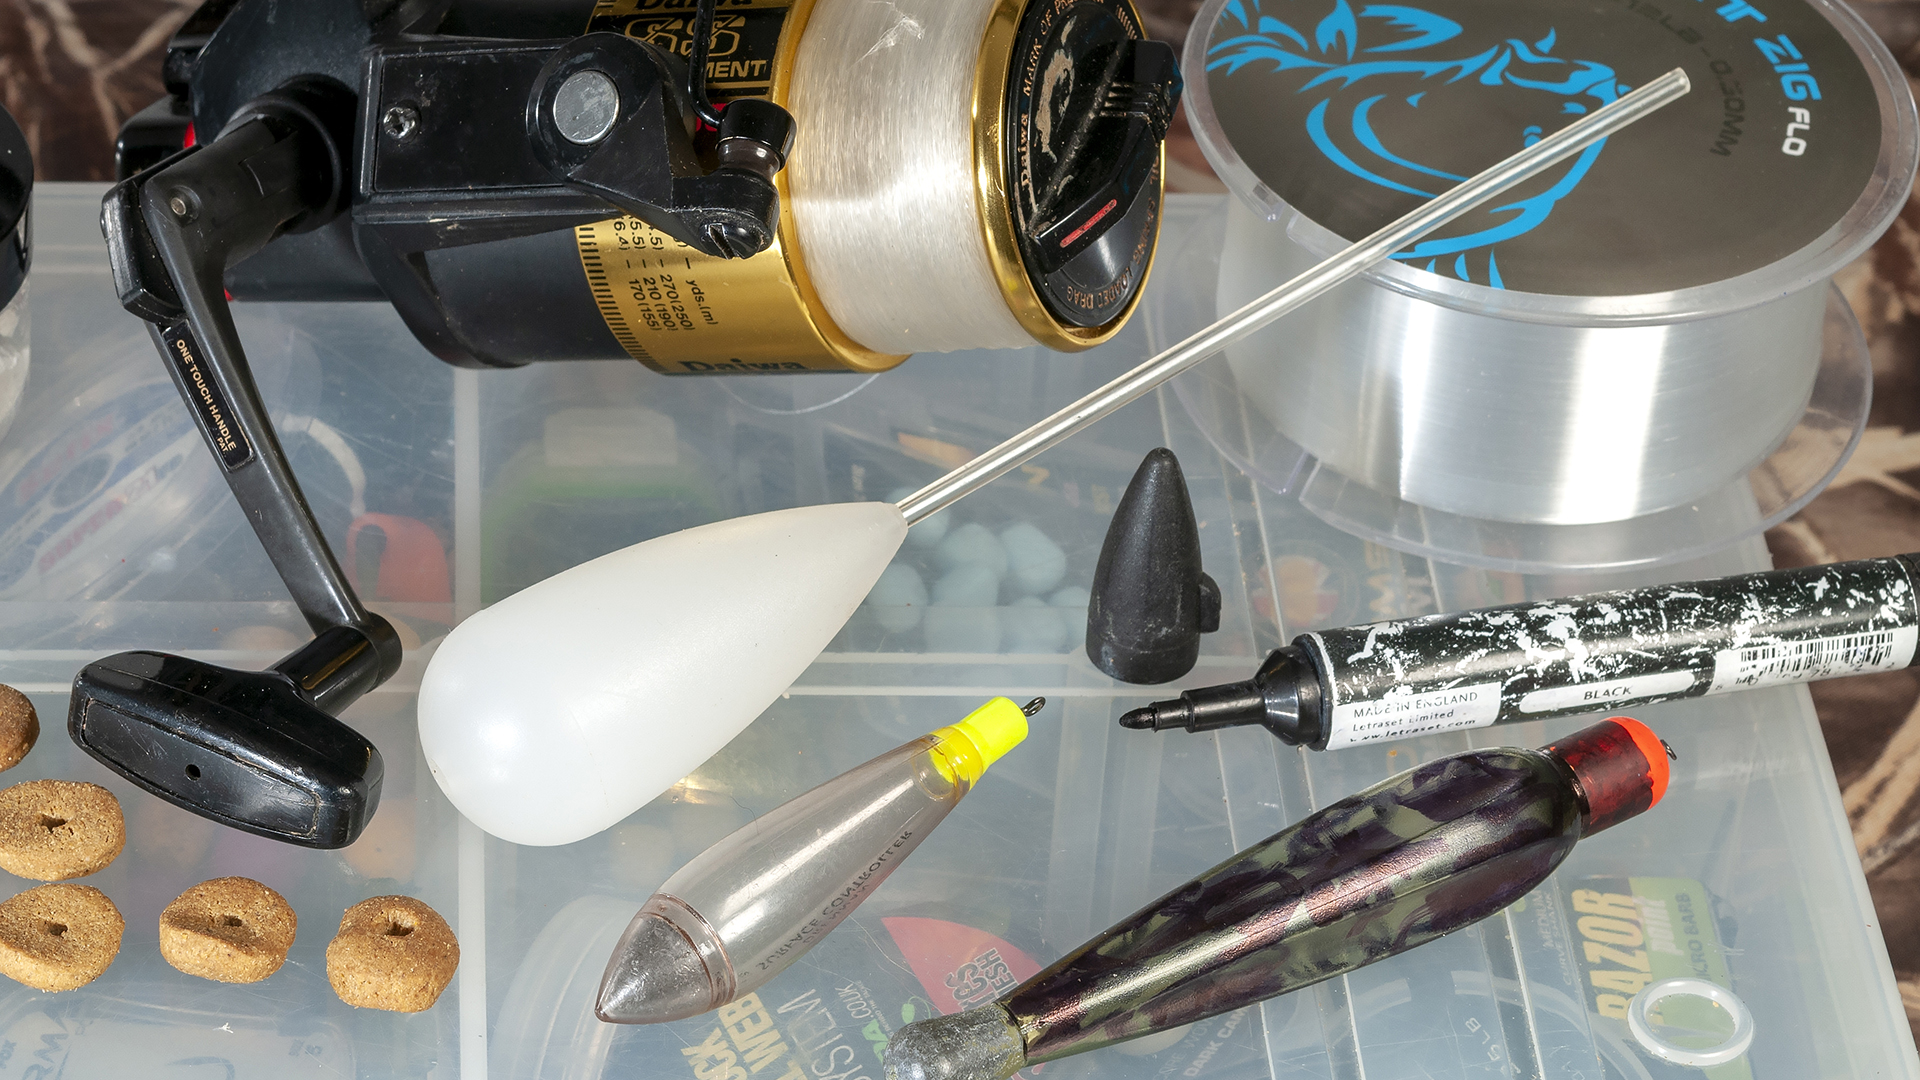 Carp floats: everything you need to know - MZg74prwmK4tiLVPDL6bw8